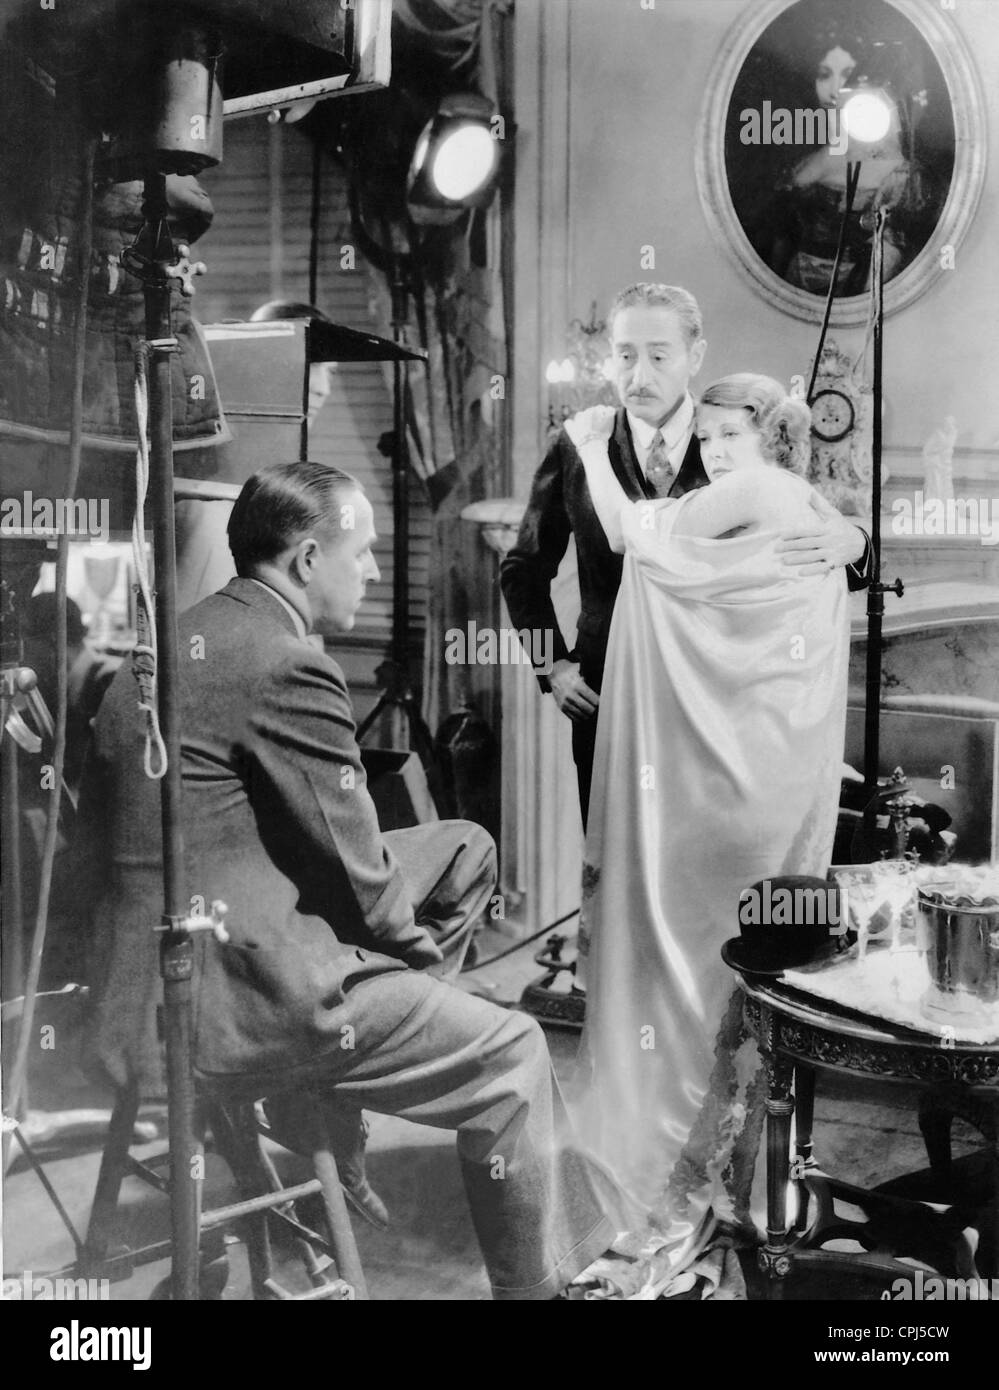 William Keighley, Adolphe Menjou et Ruth Chatterton, 1934 Banque D'Images